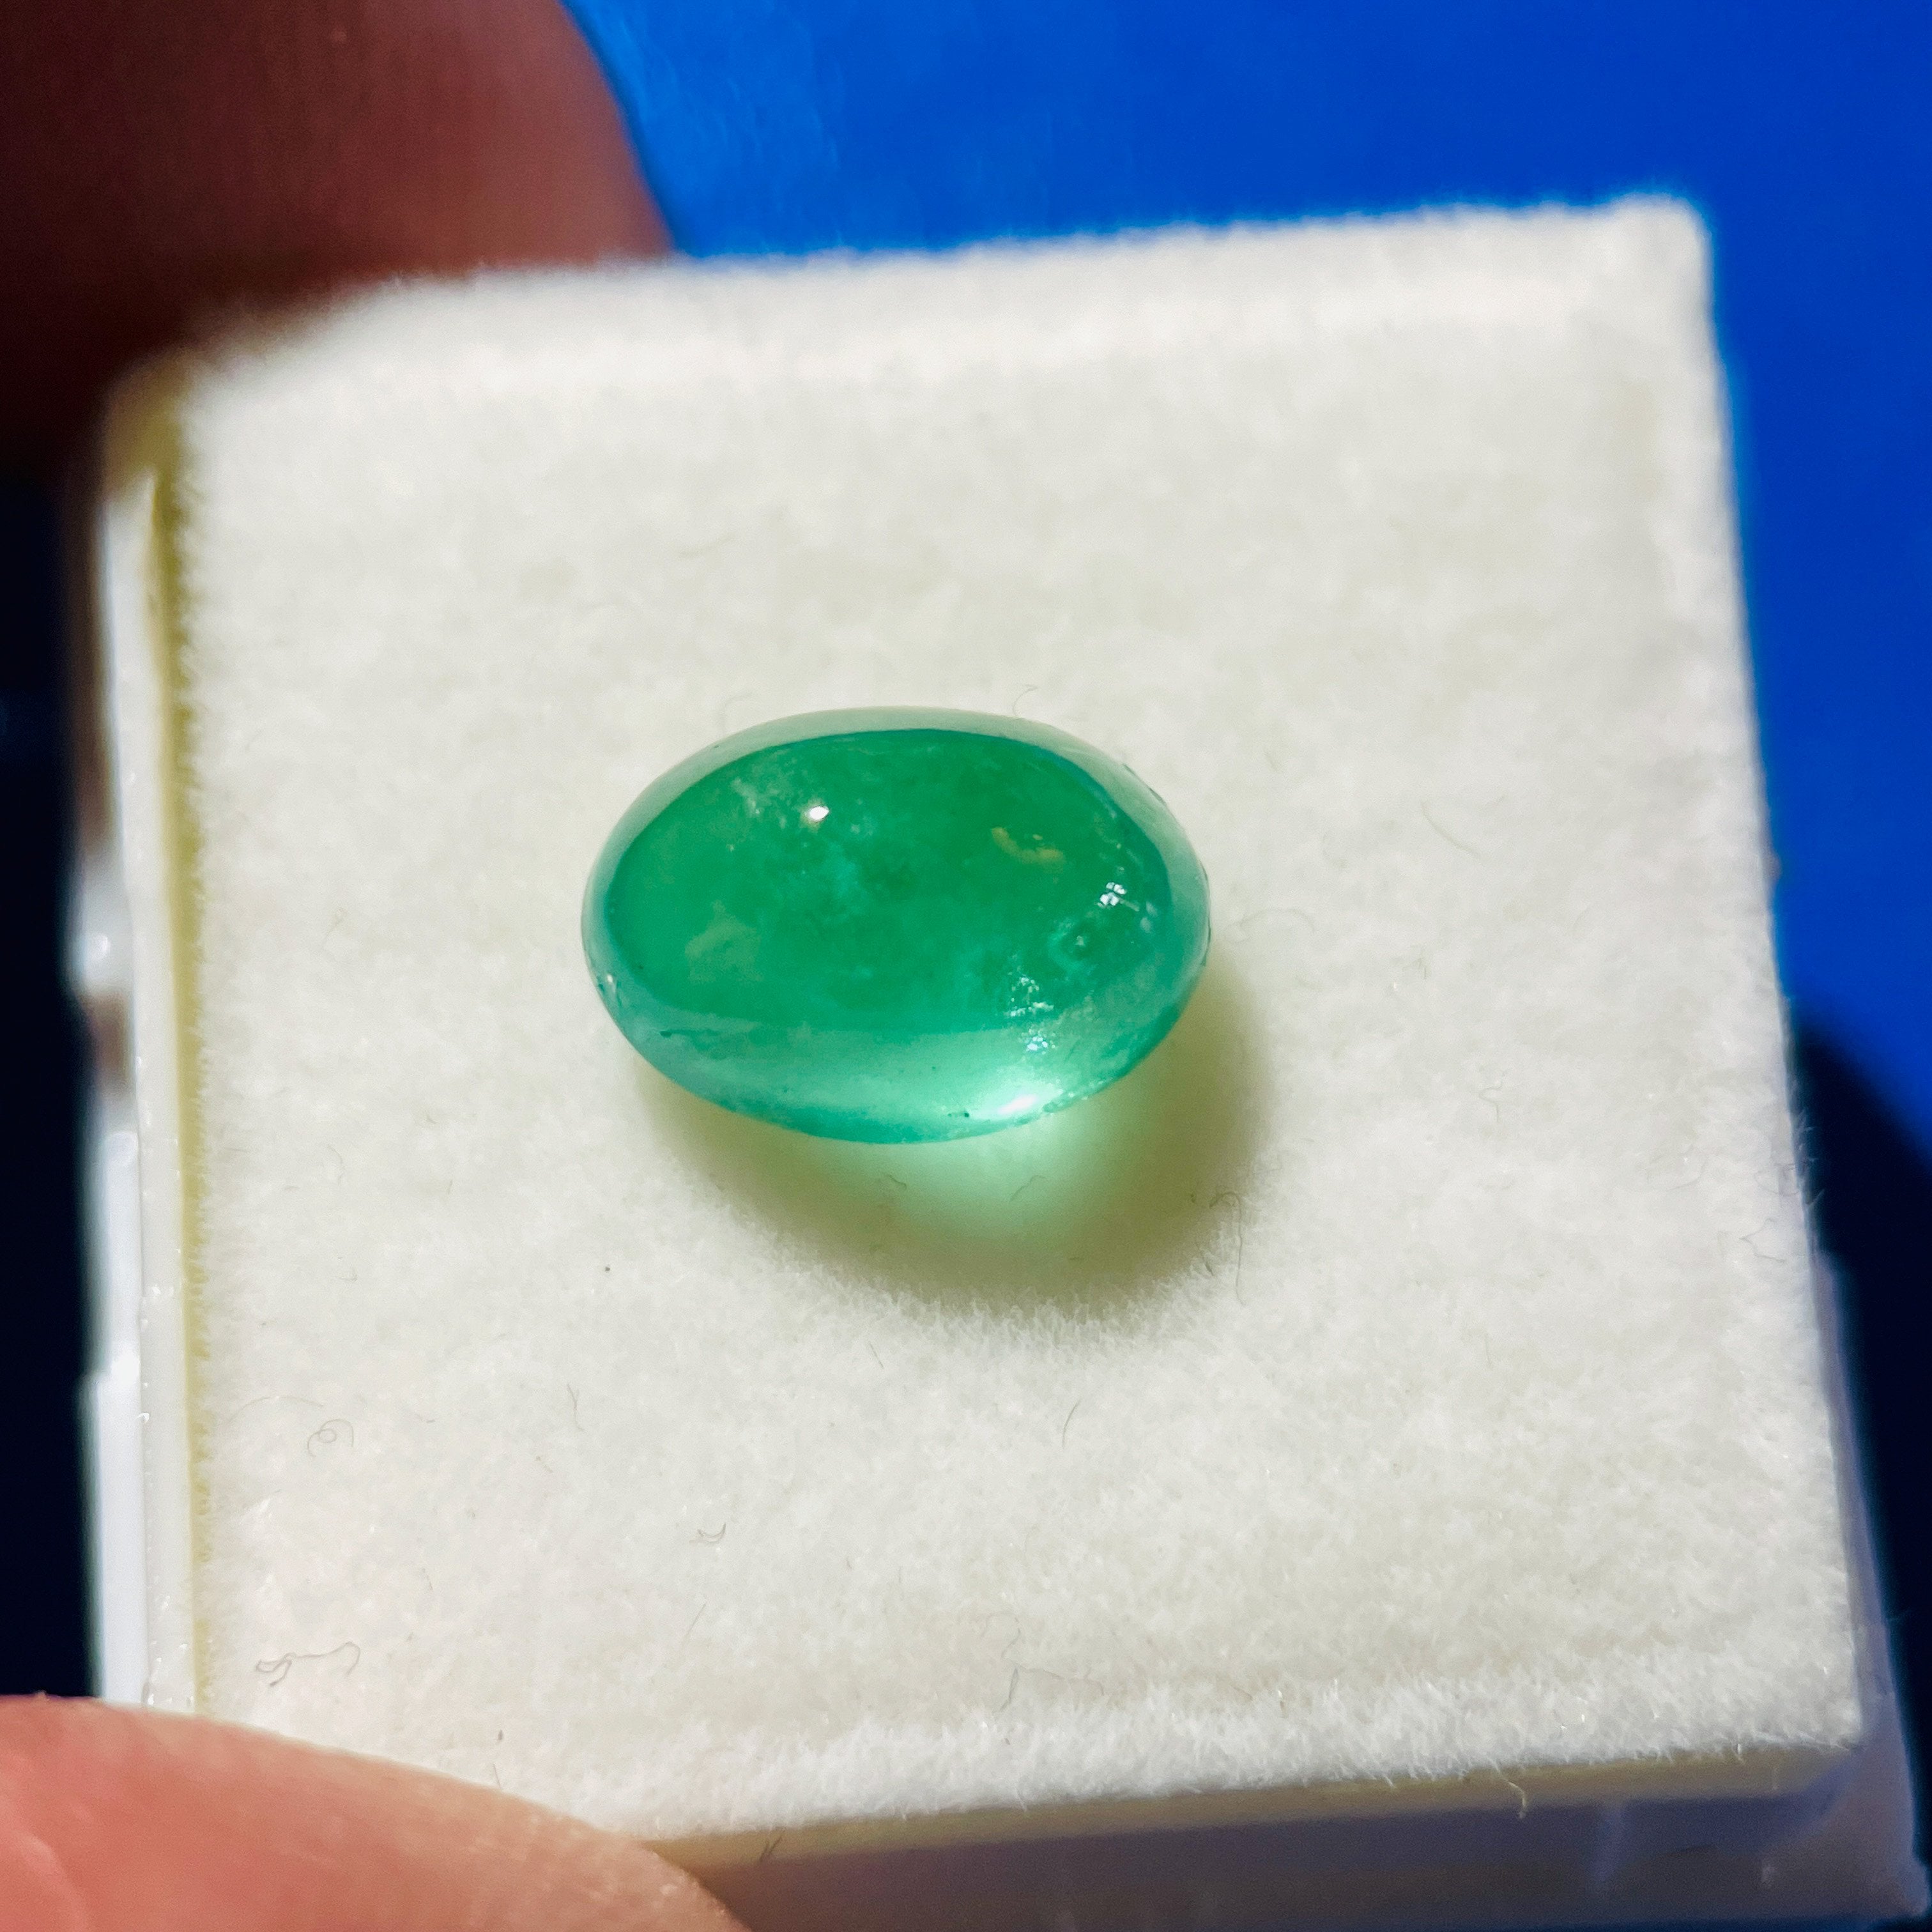 3.02Ct Emerald Tanzania. Untreated Unheated No Oil. Seems To Have A Moving Spot Like Star See Video.